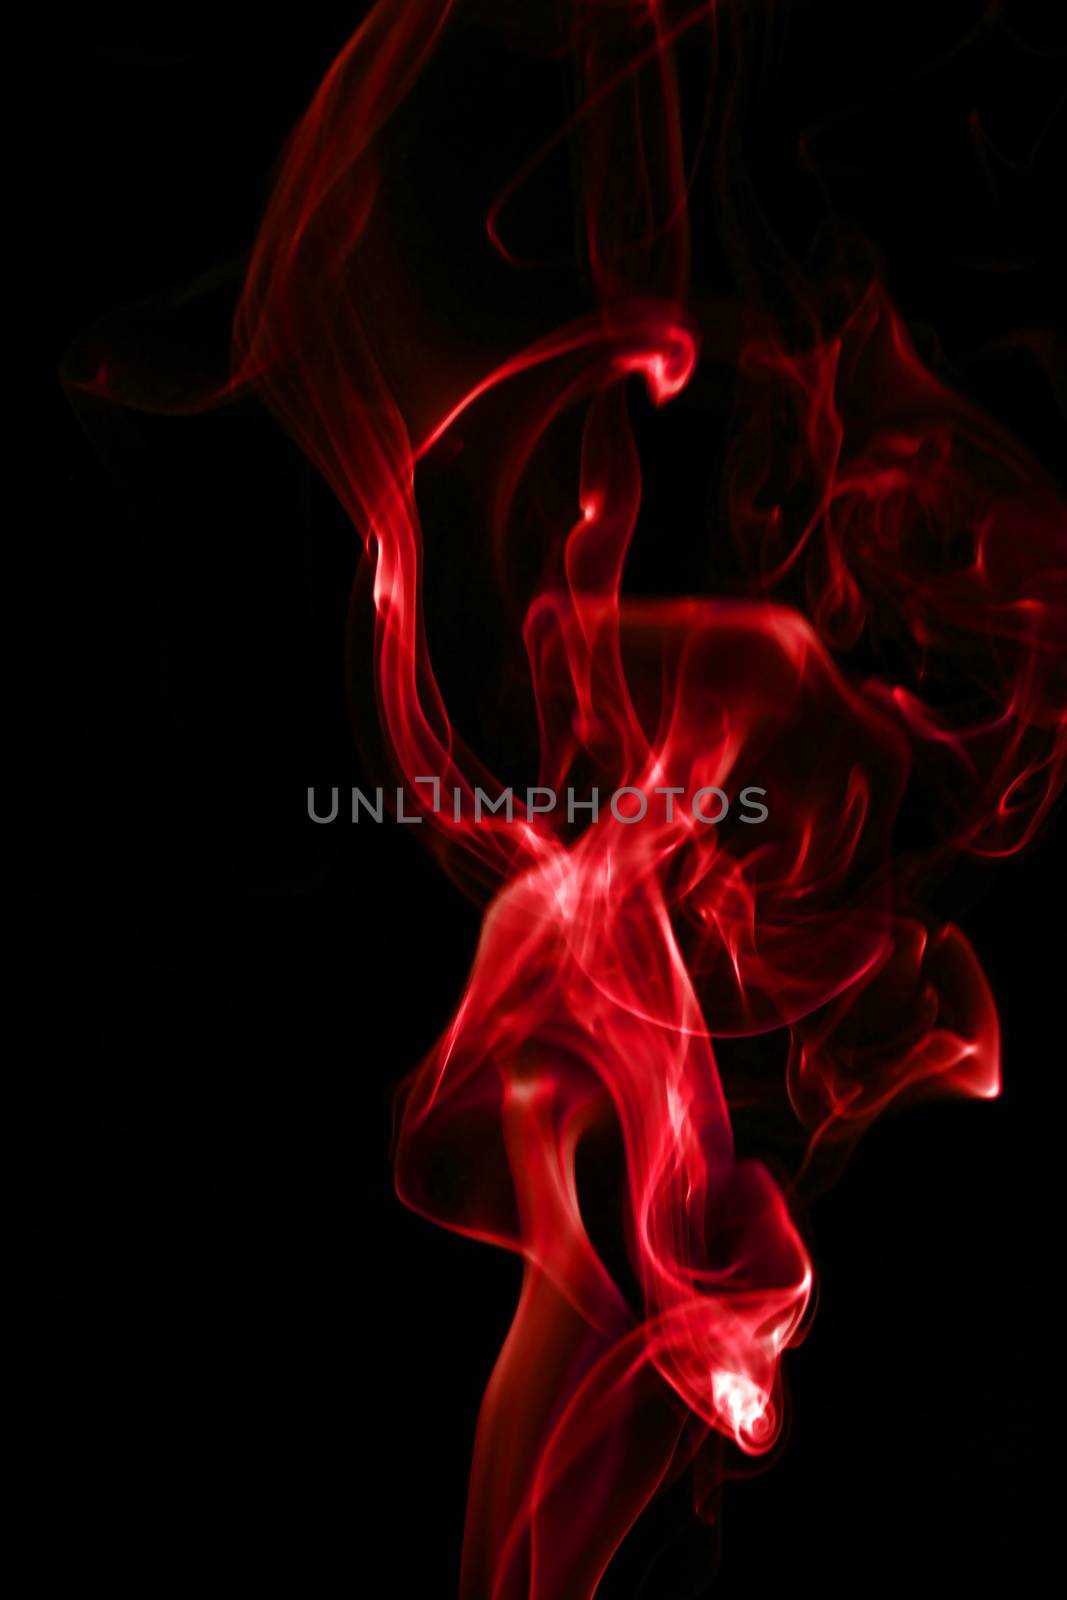 red smoke abstract background close up